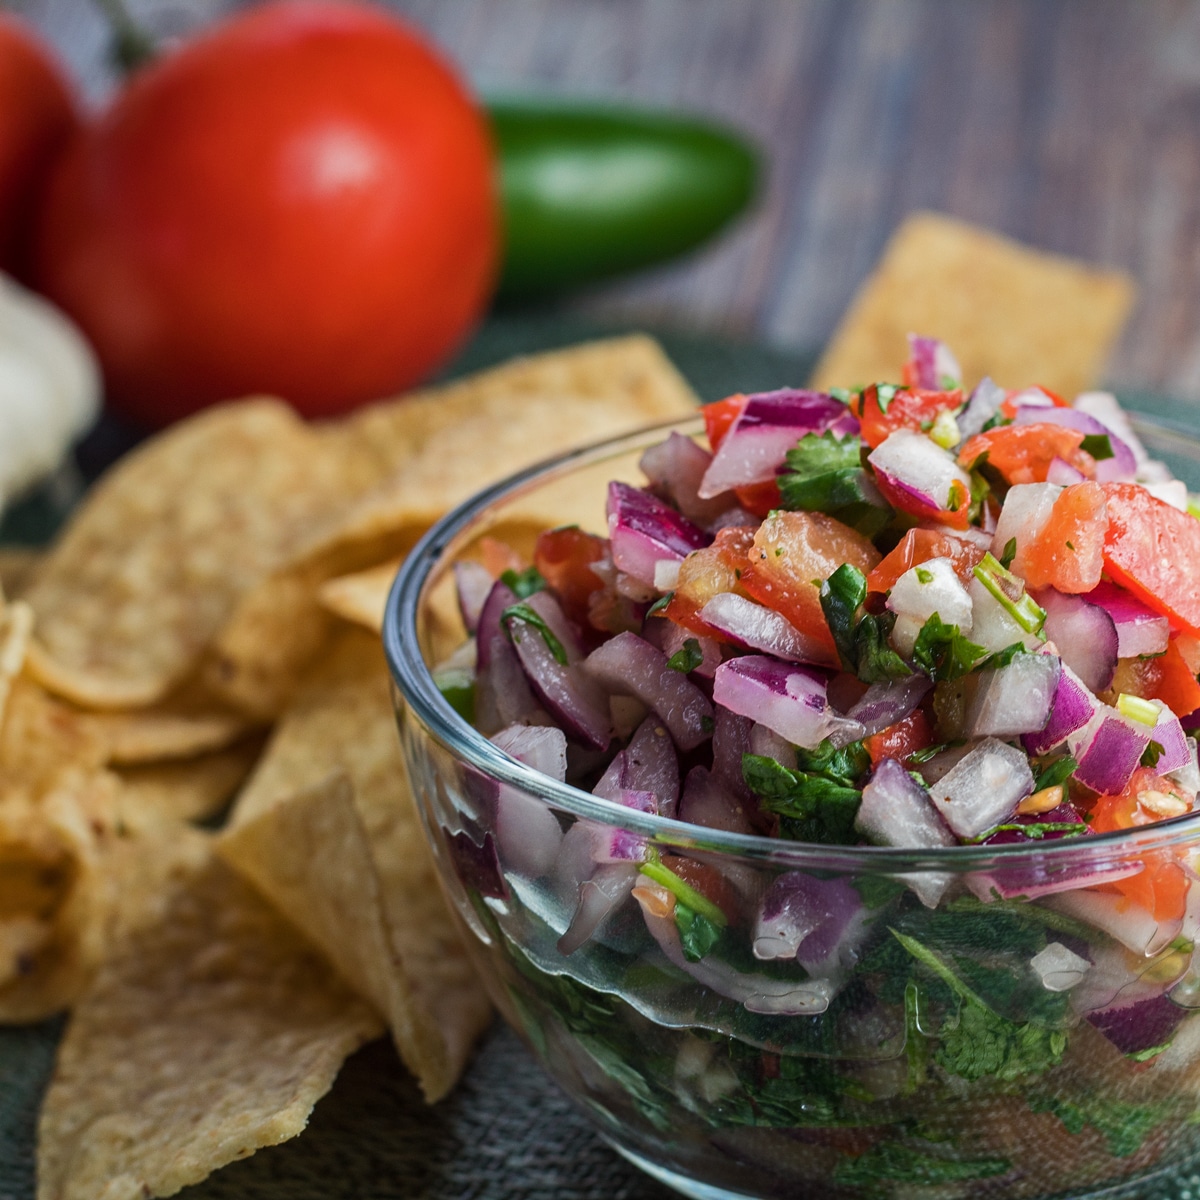 large square sideview image of pico de gallo with chips and fresh vegetables.